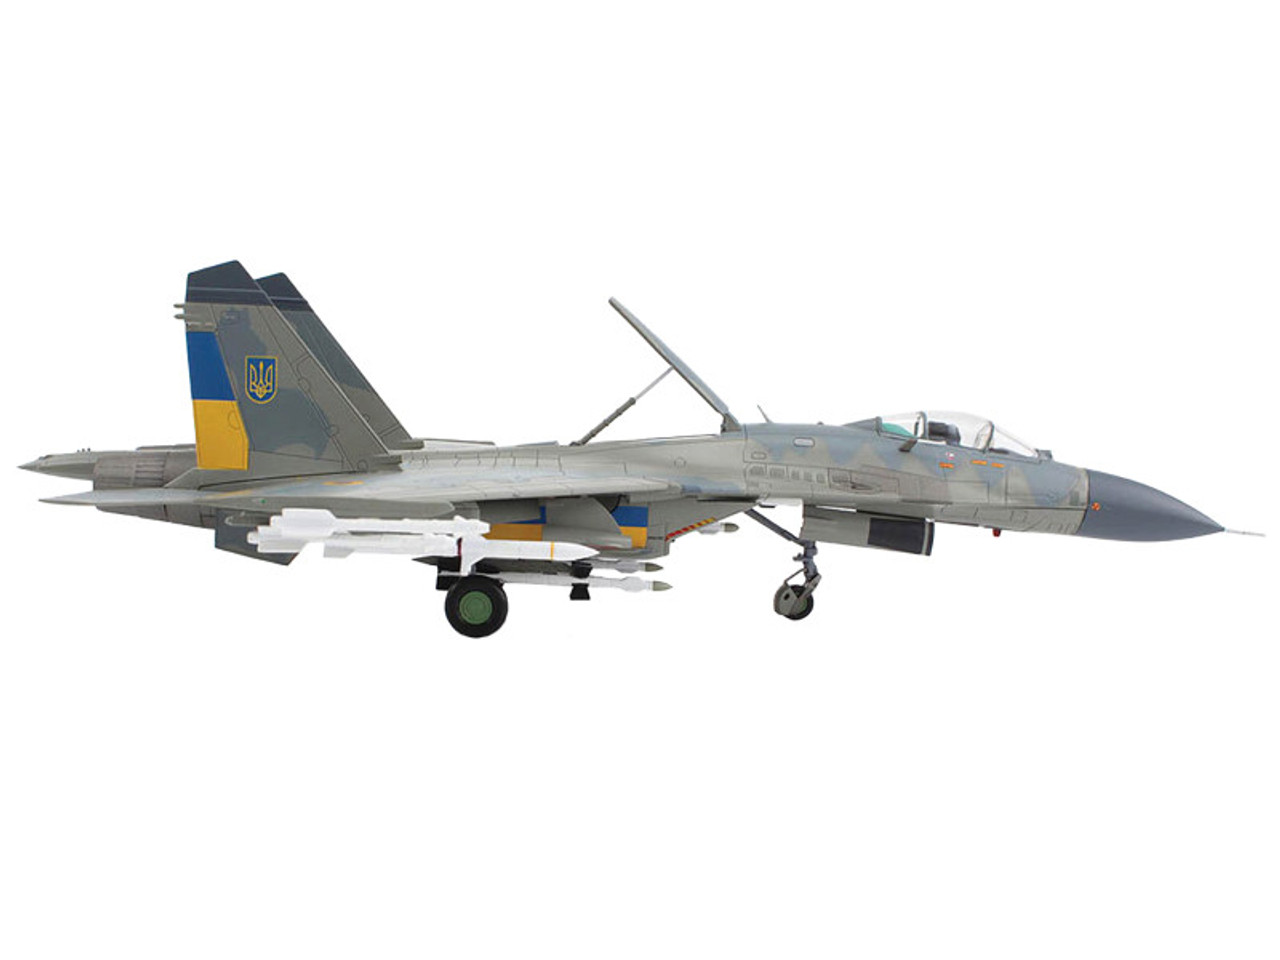 Sukhoi Su-27 Flanker Fighter Aircraft "Compass Ghost Grey Scheme" (2023) Ukrainian Air Force "Air Power Series" 1/72 Diecast Model by Hobby Master